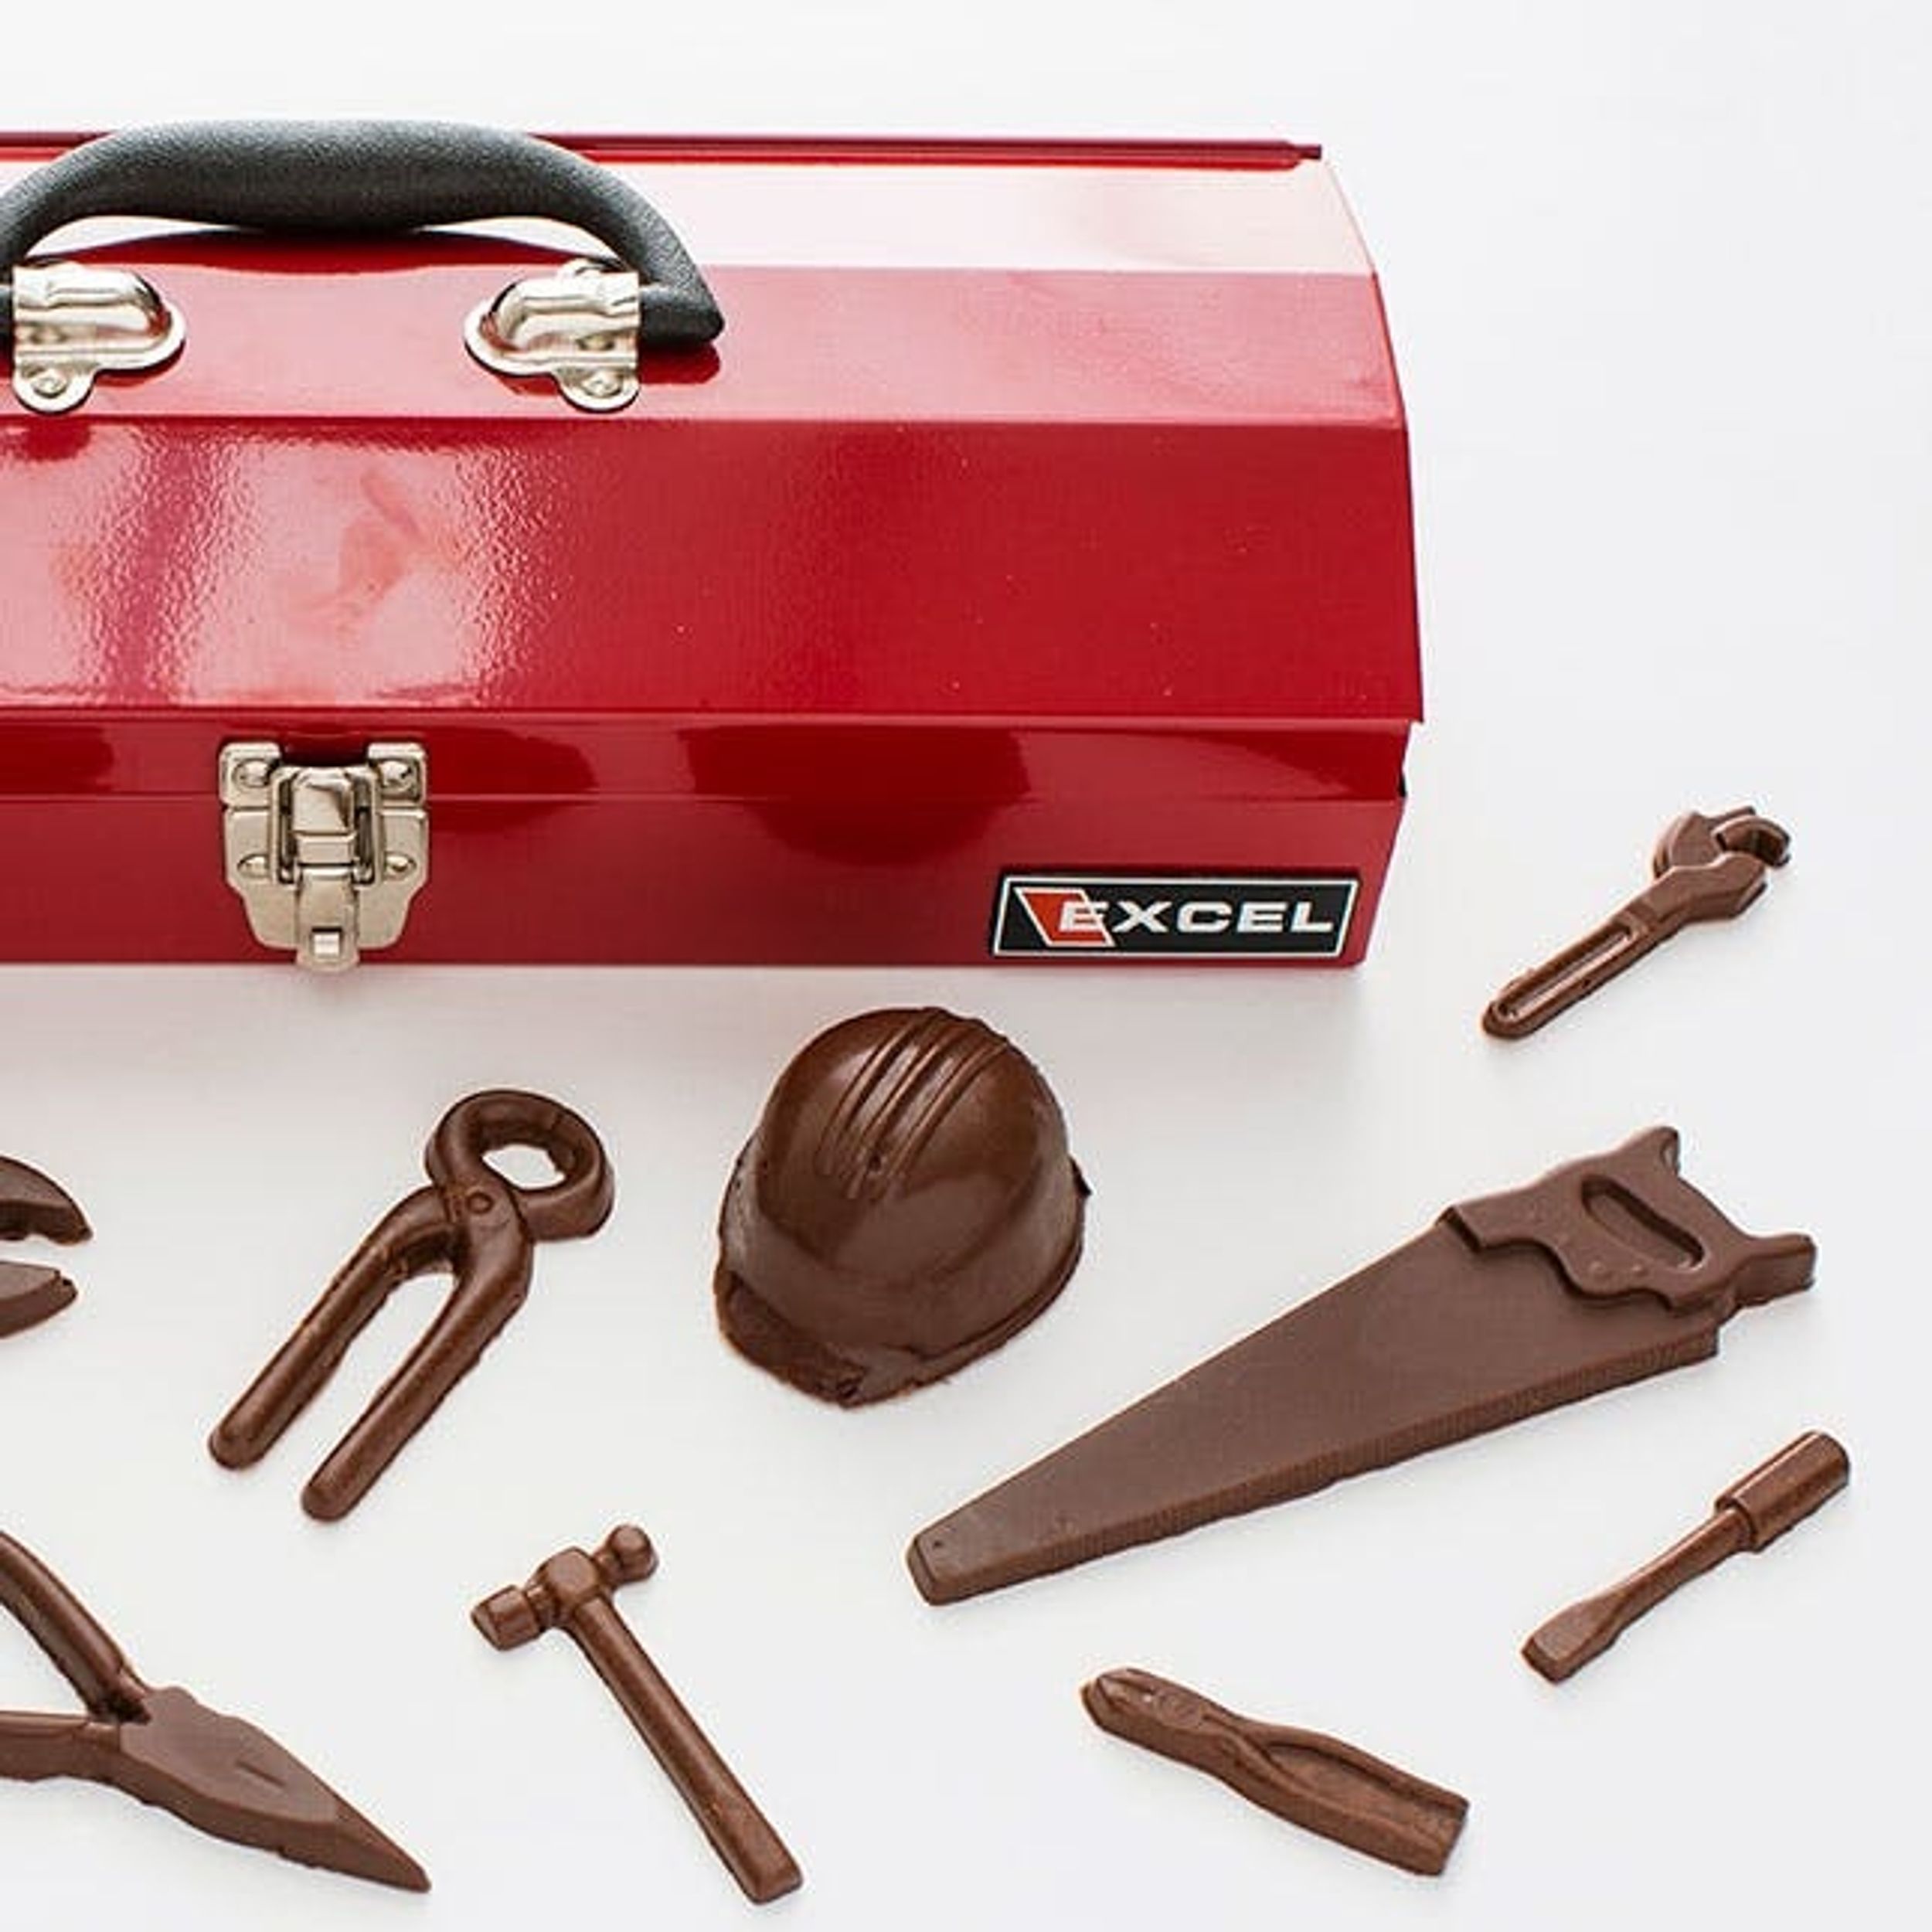 How to Make a Chocolate Toolbox for Father’s Day